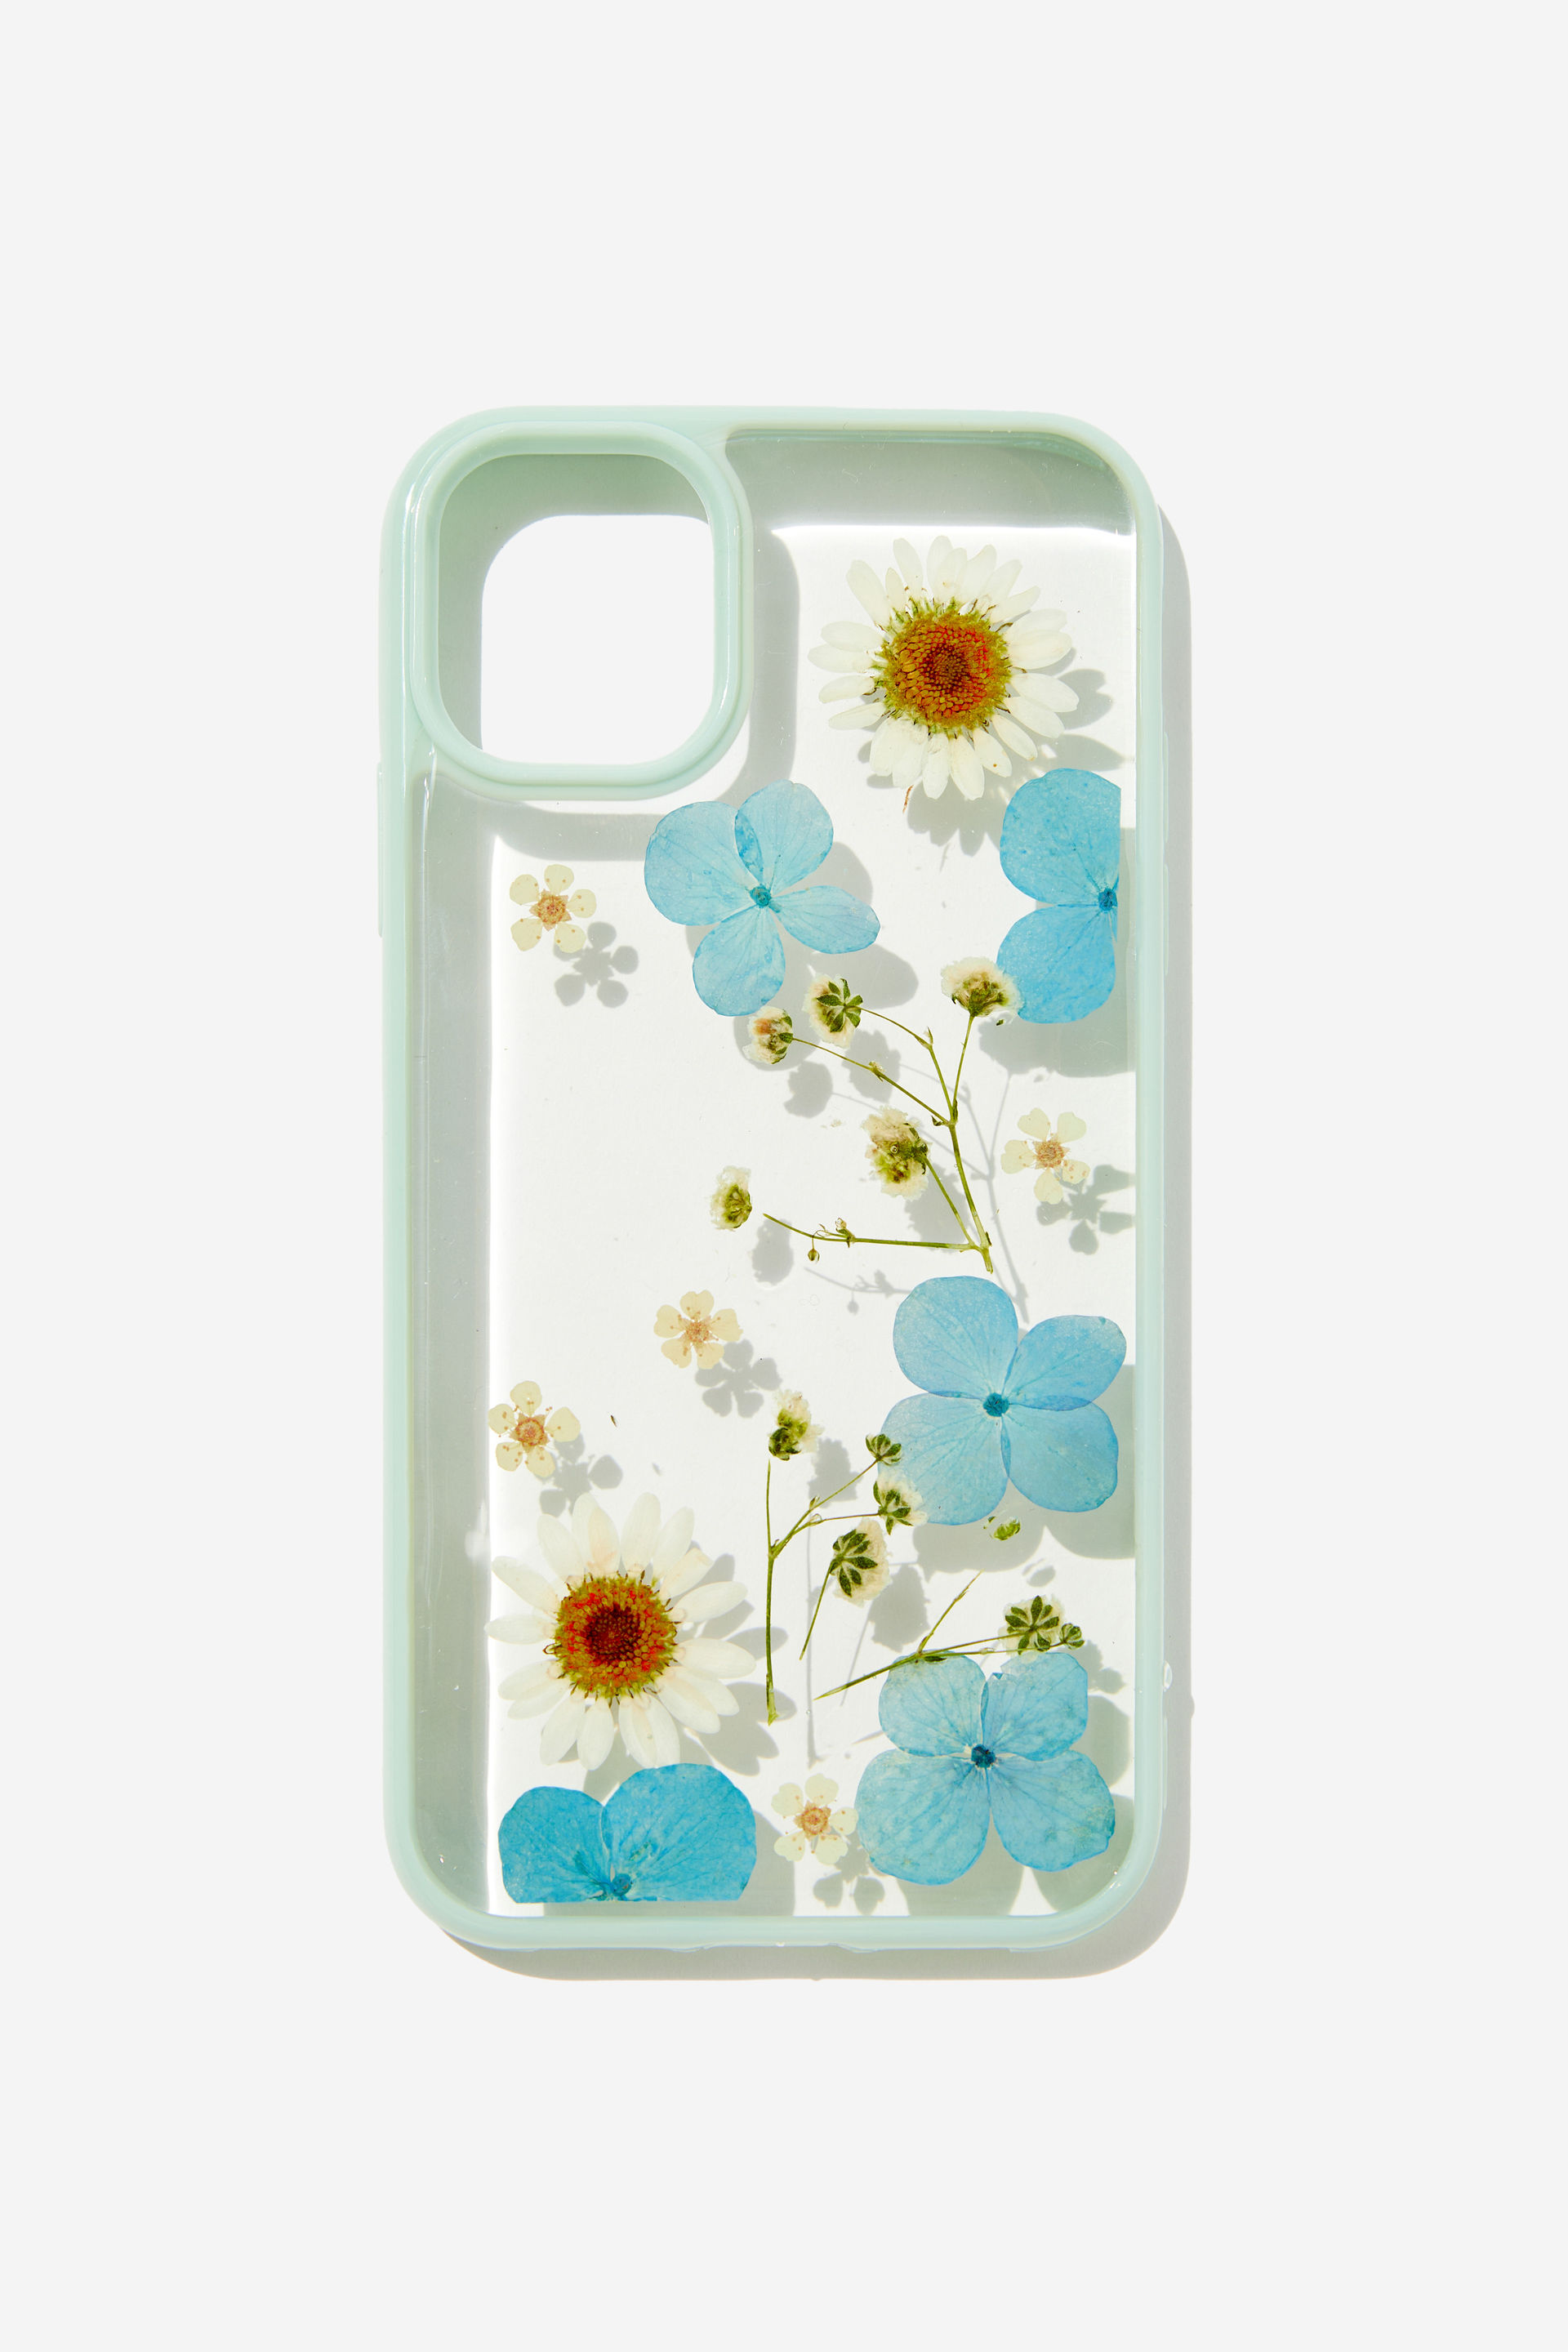 Typo - Protective Phone Case iPhone 11 - Trapped daisy / arctic blue